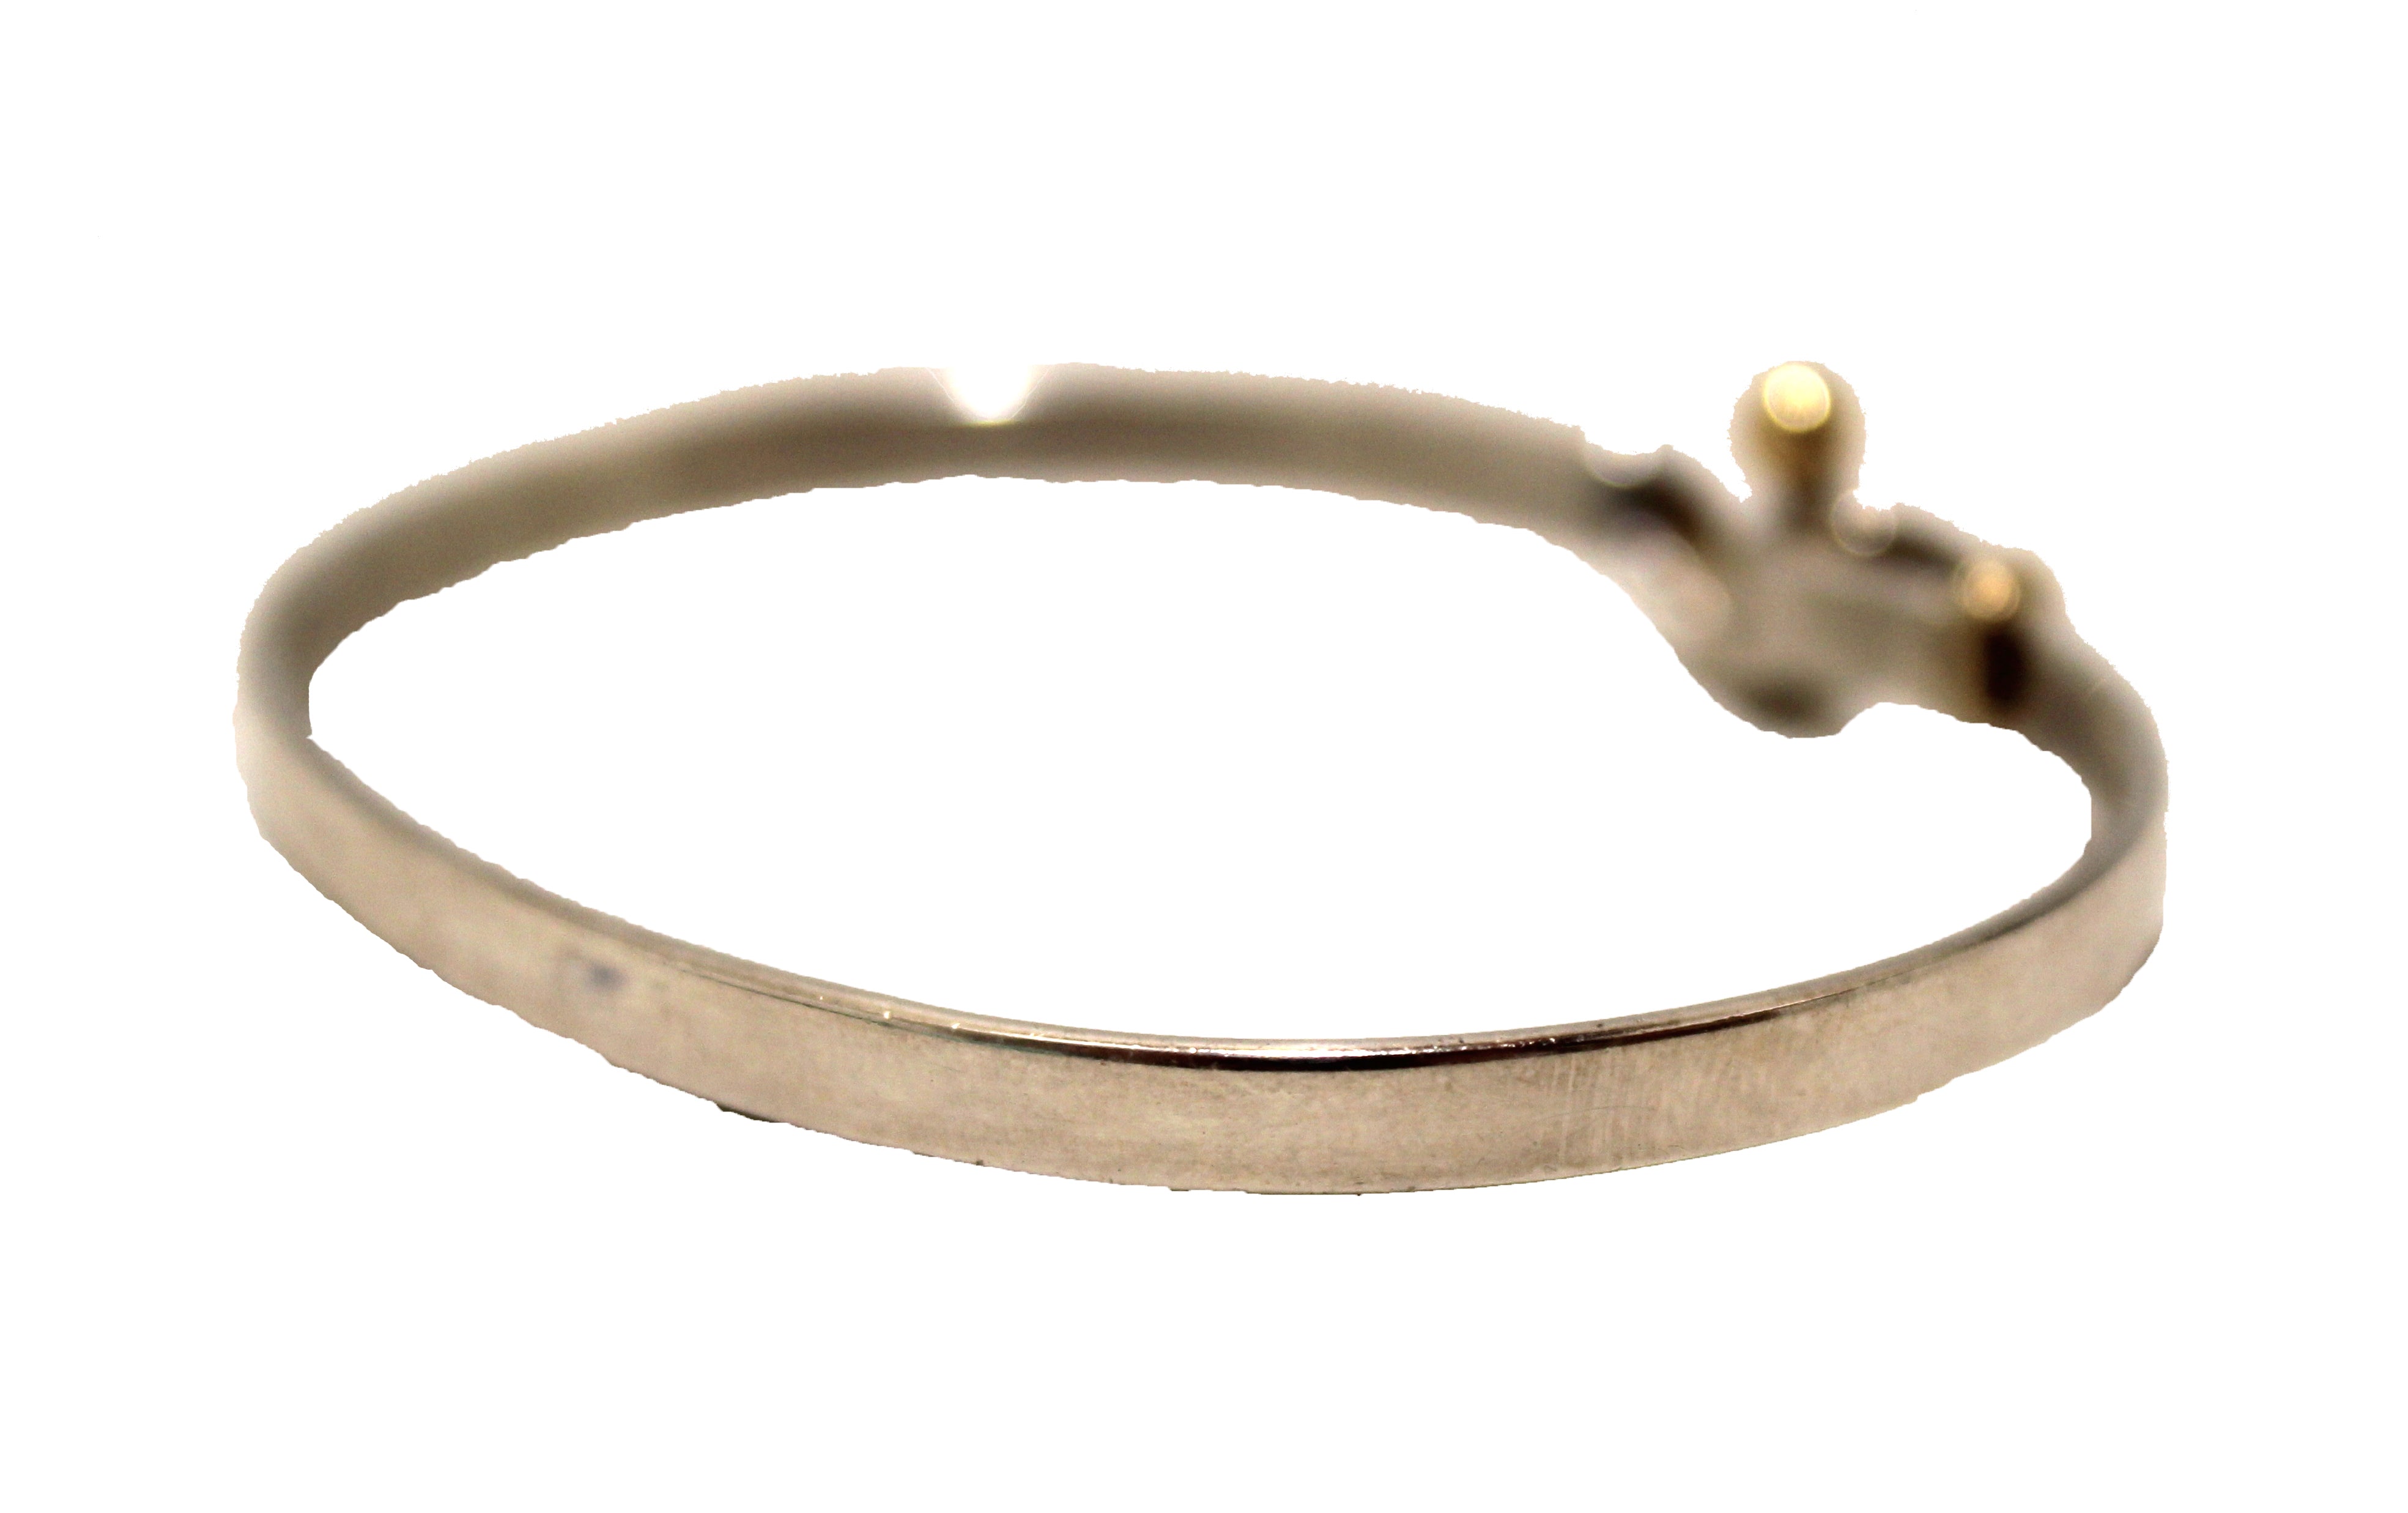 Authentic Tiffany & Co. 18K Gold and Sterling Silver Hook and Eye Love Knot Bangle